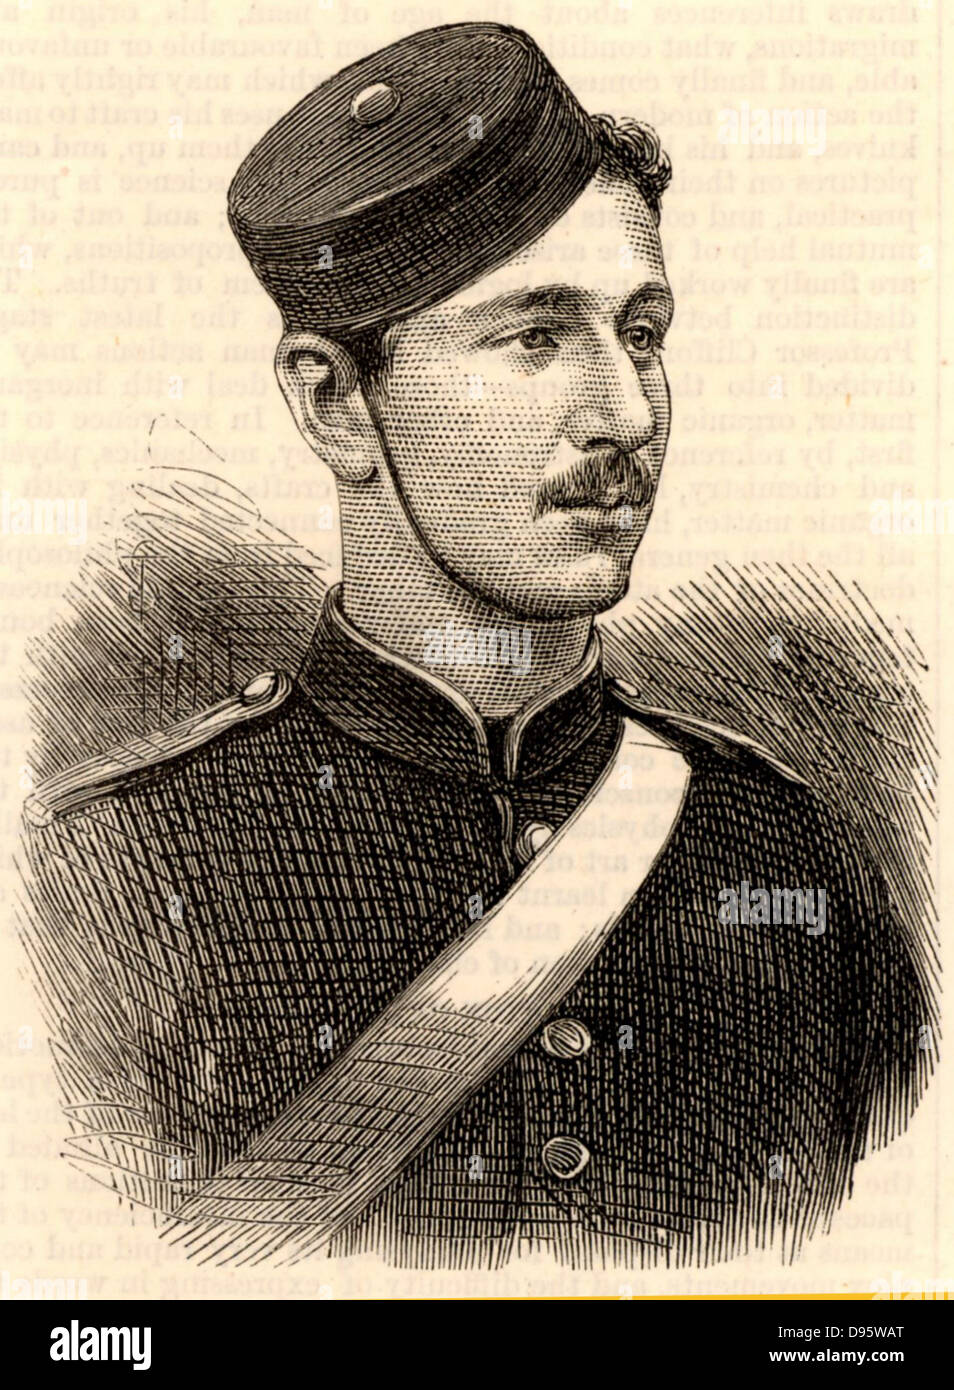 The Prince Imperial. Prince Louis Napoleon (1856-1879), son of Napoleon III of France and Empress Eugenie, as a cadet at the Royal Military Academy, Woolwich. Served in the British army and was killed in the Zulu War.  From 'The Illustrated London News' (London, 6 March 1875). Stock Photo